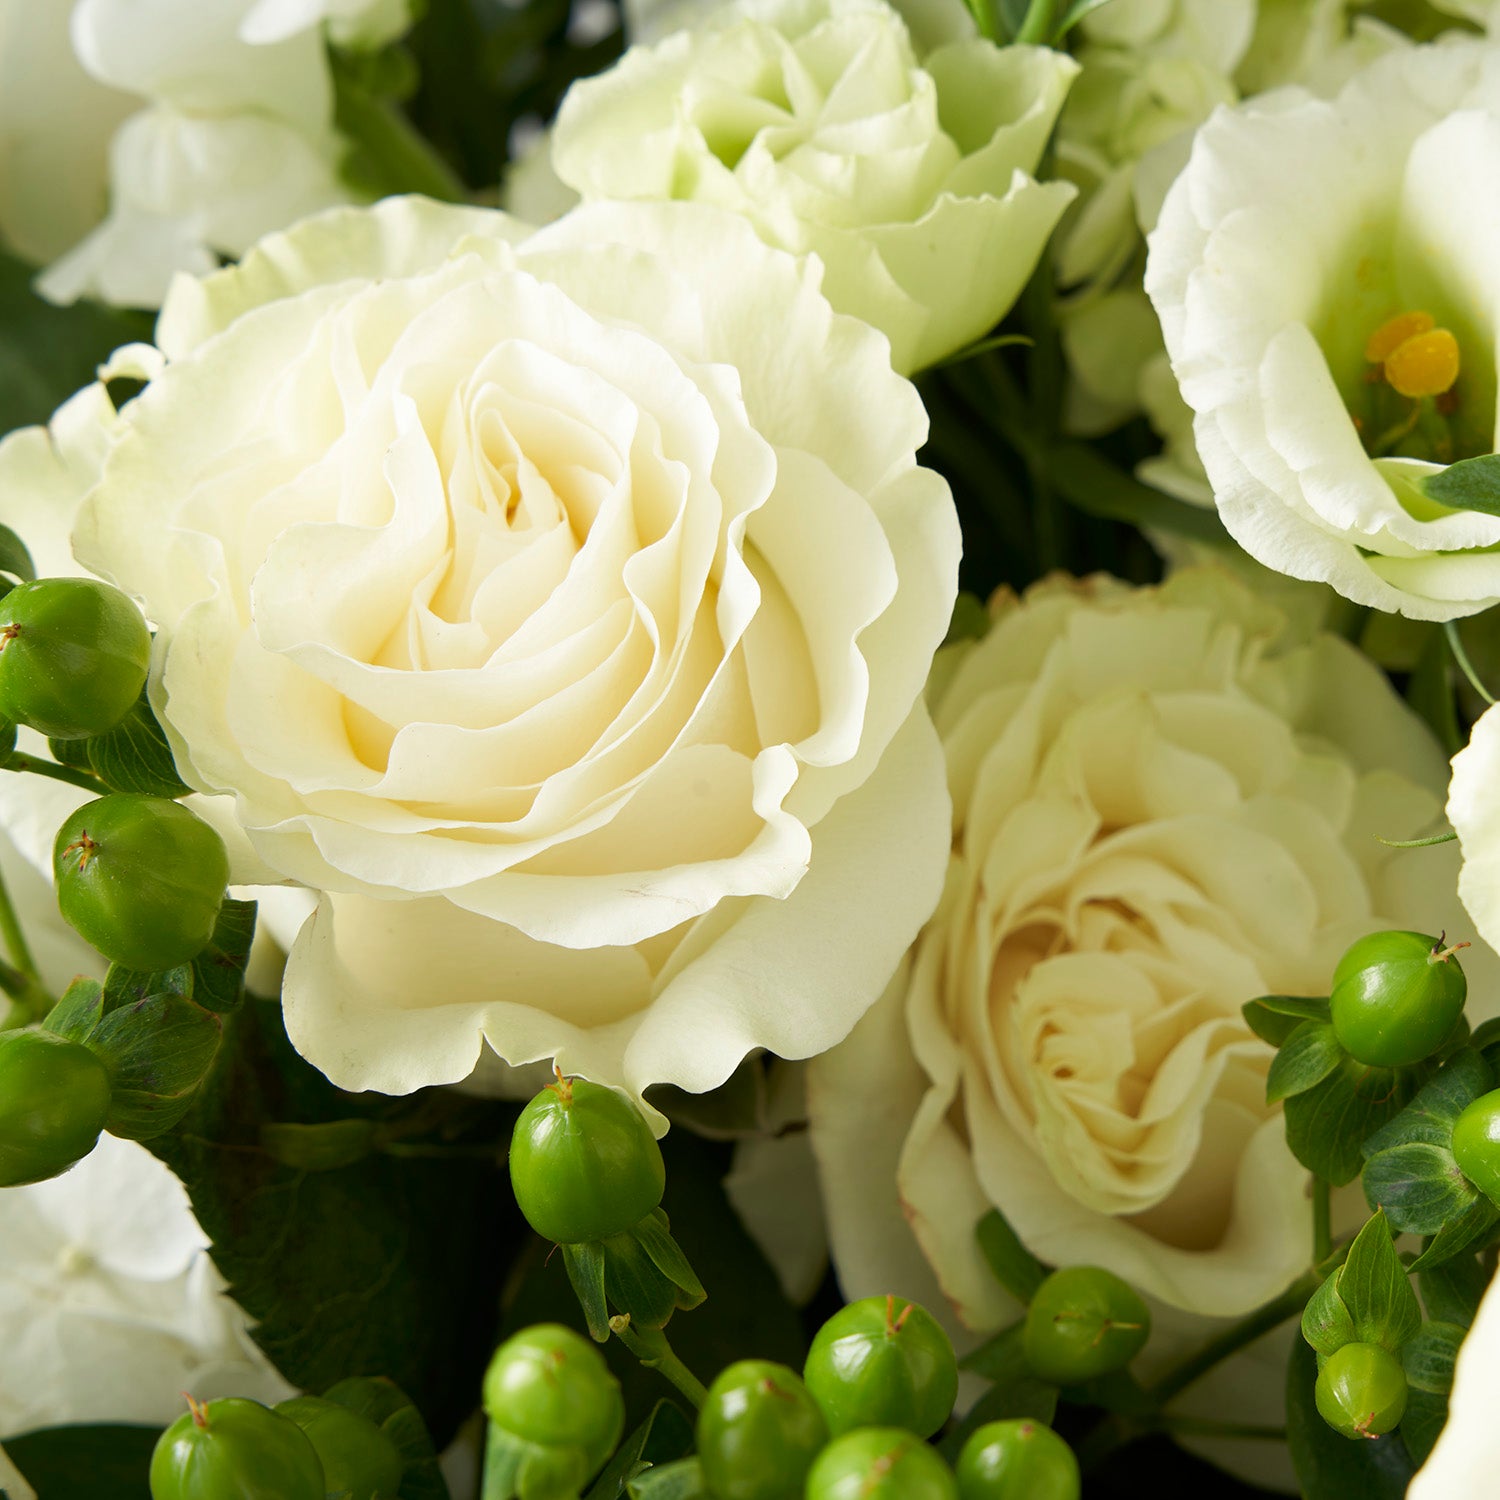 Closeup of white Mondial roses and green hypericum berries.